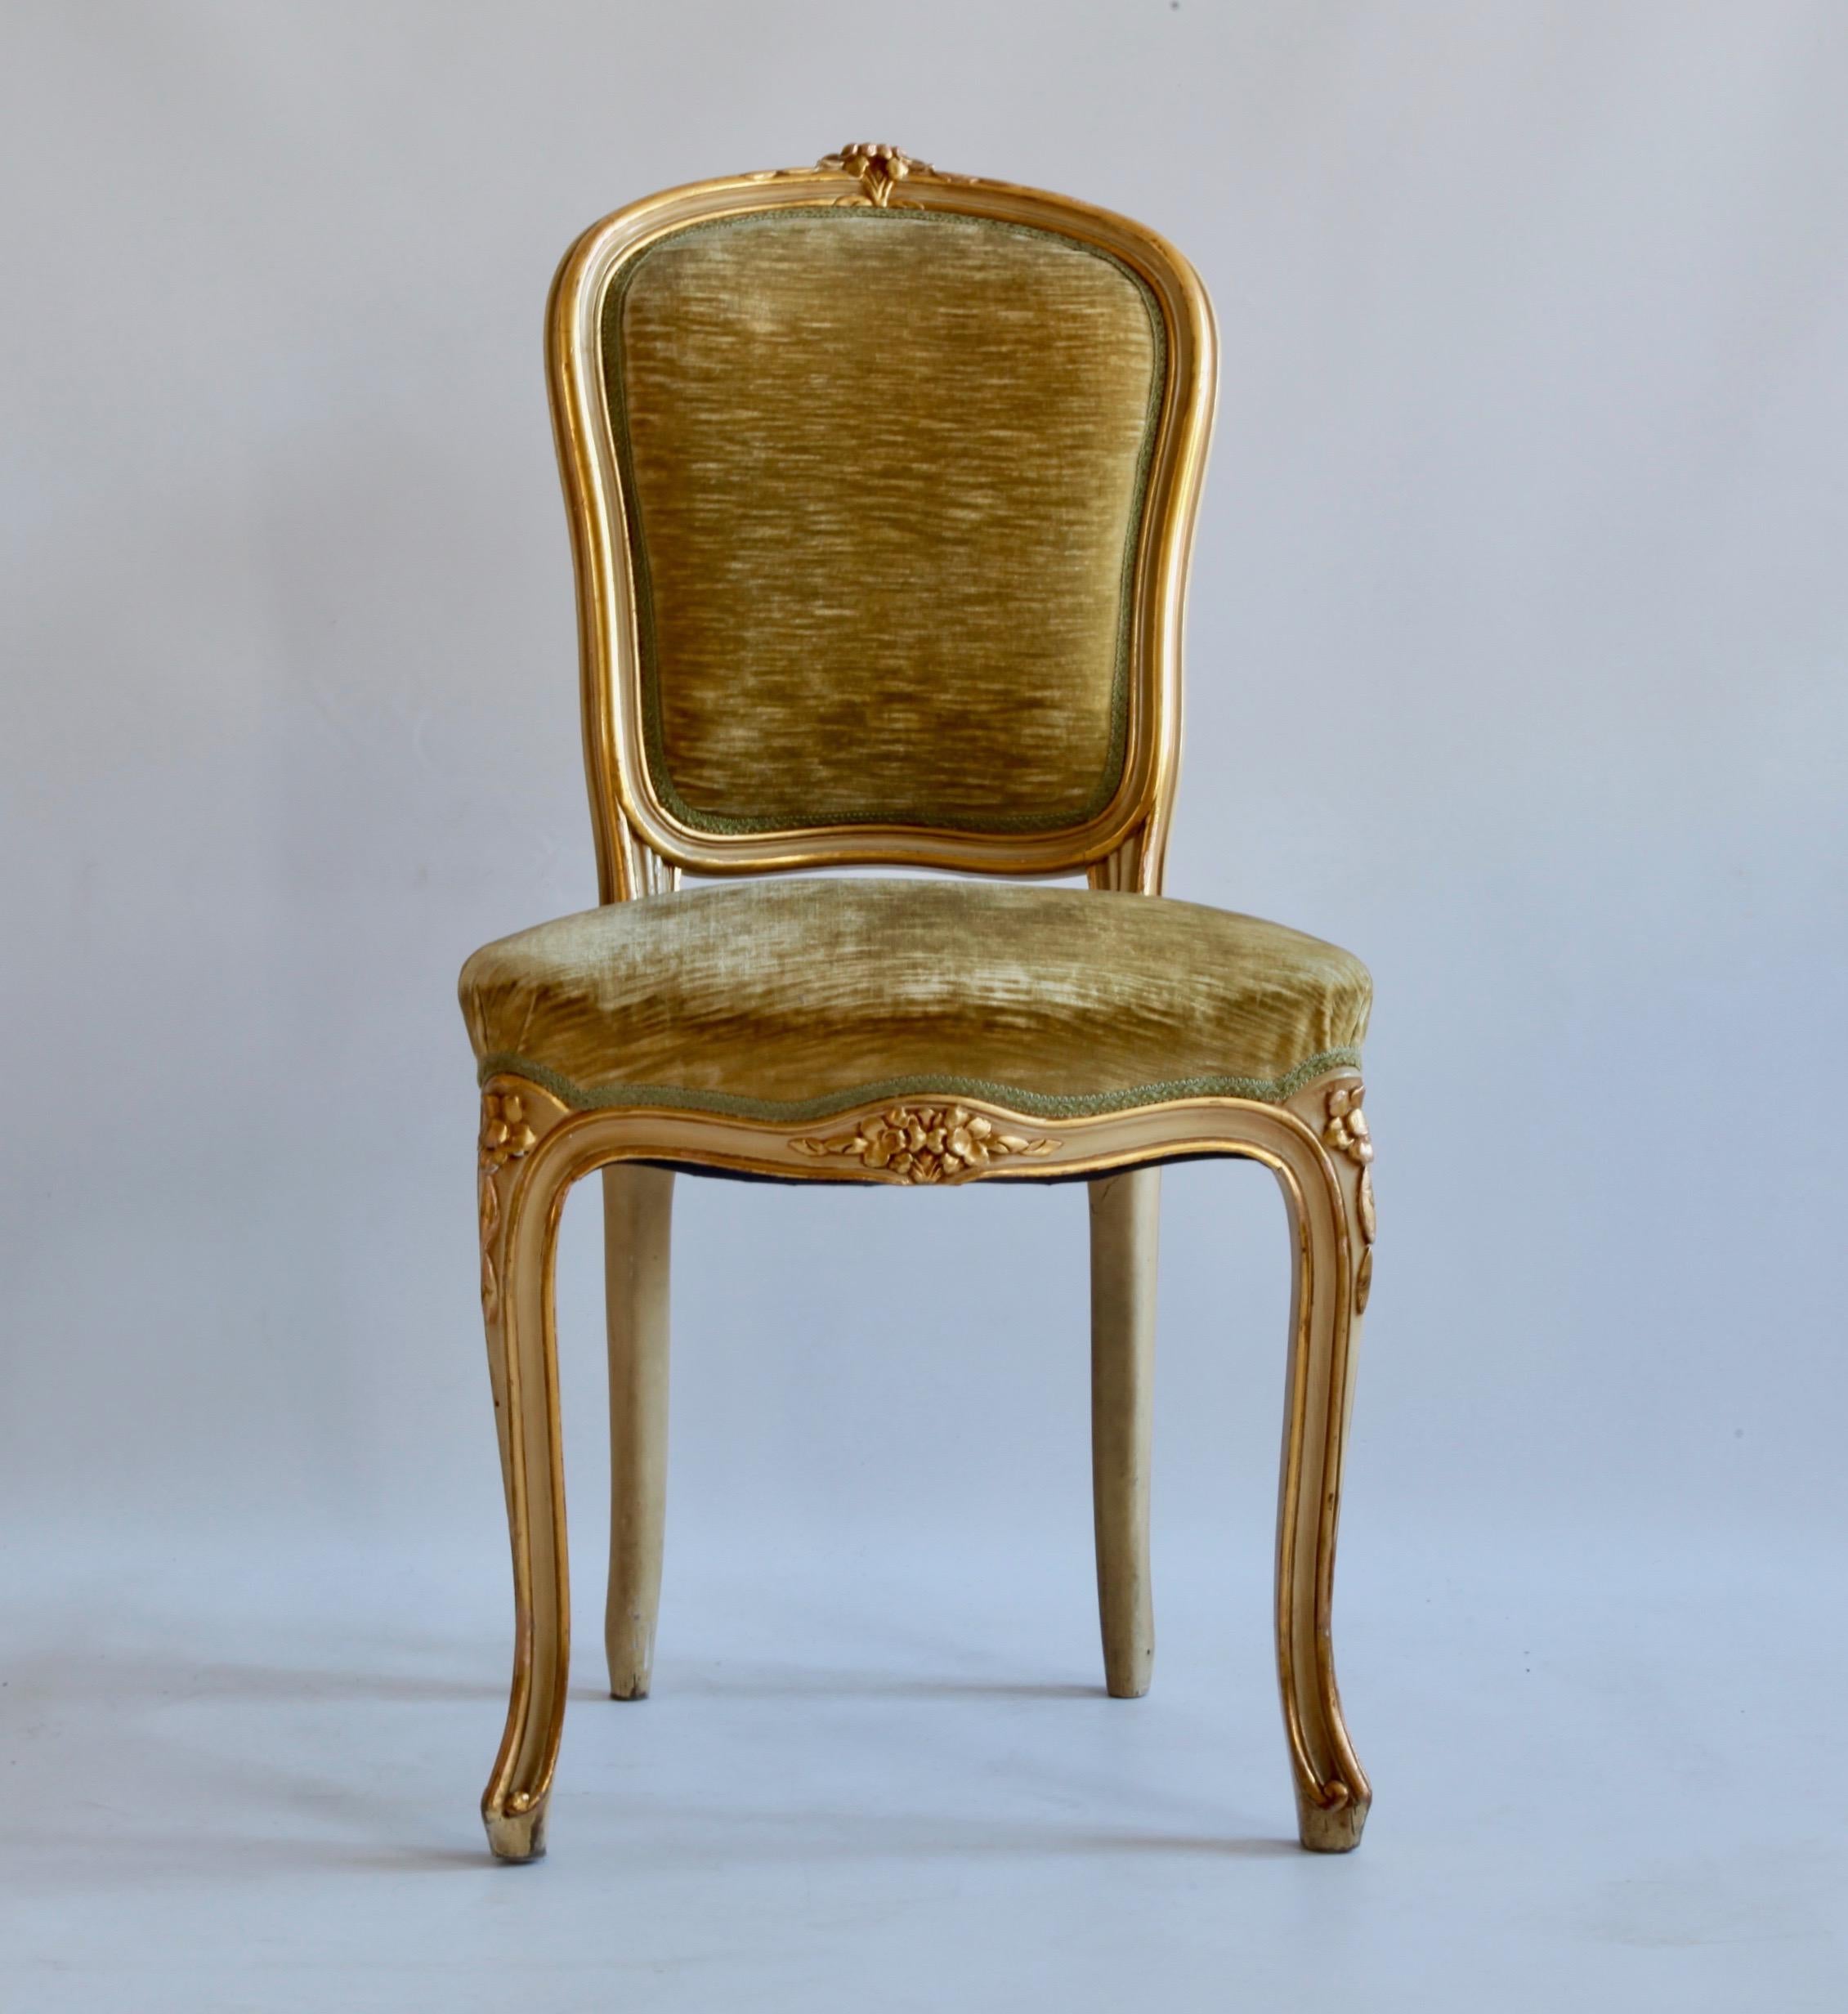 A complete set of 6 dining chairs hand carved in solid wood in the Louis XV style, designed with beveled outlines and floral detailing displayed on the top, legs and front of the seat. The chairs have an original cream white paint finish, naturally